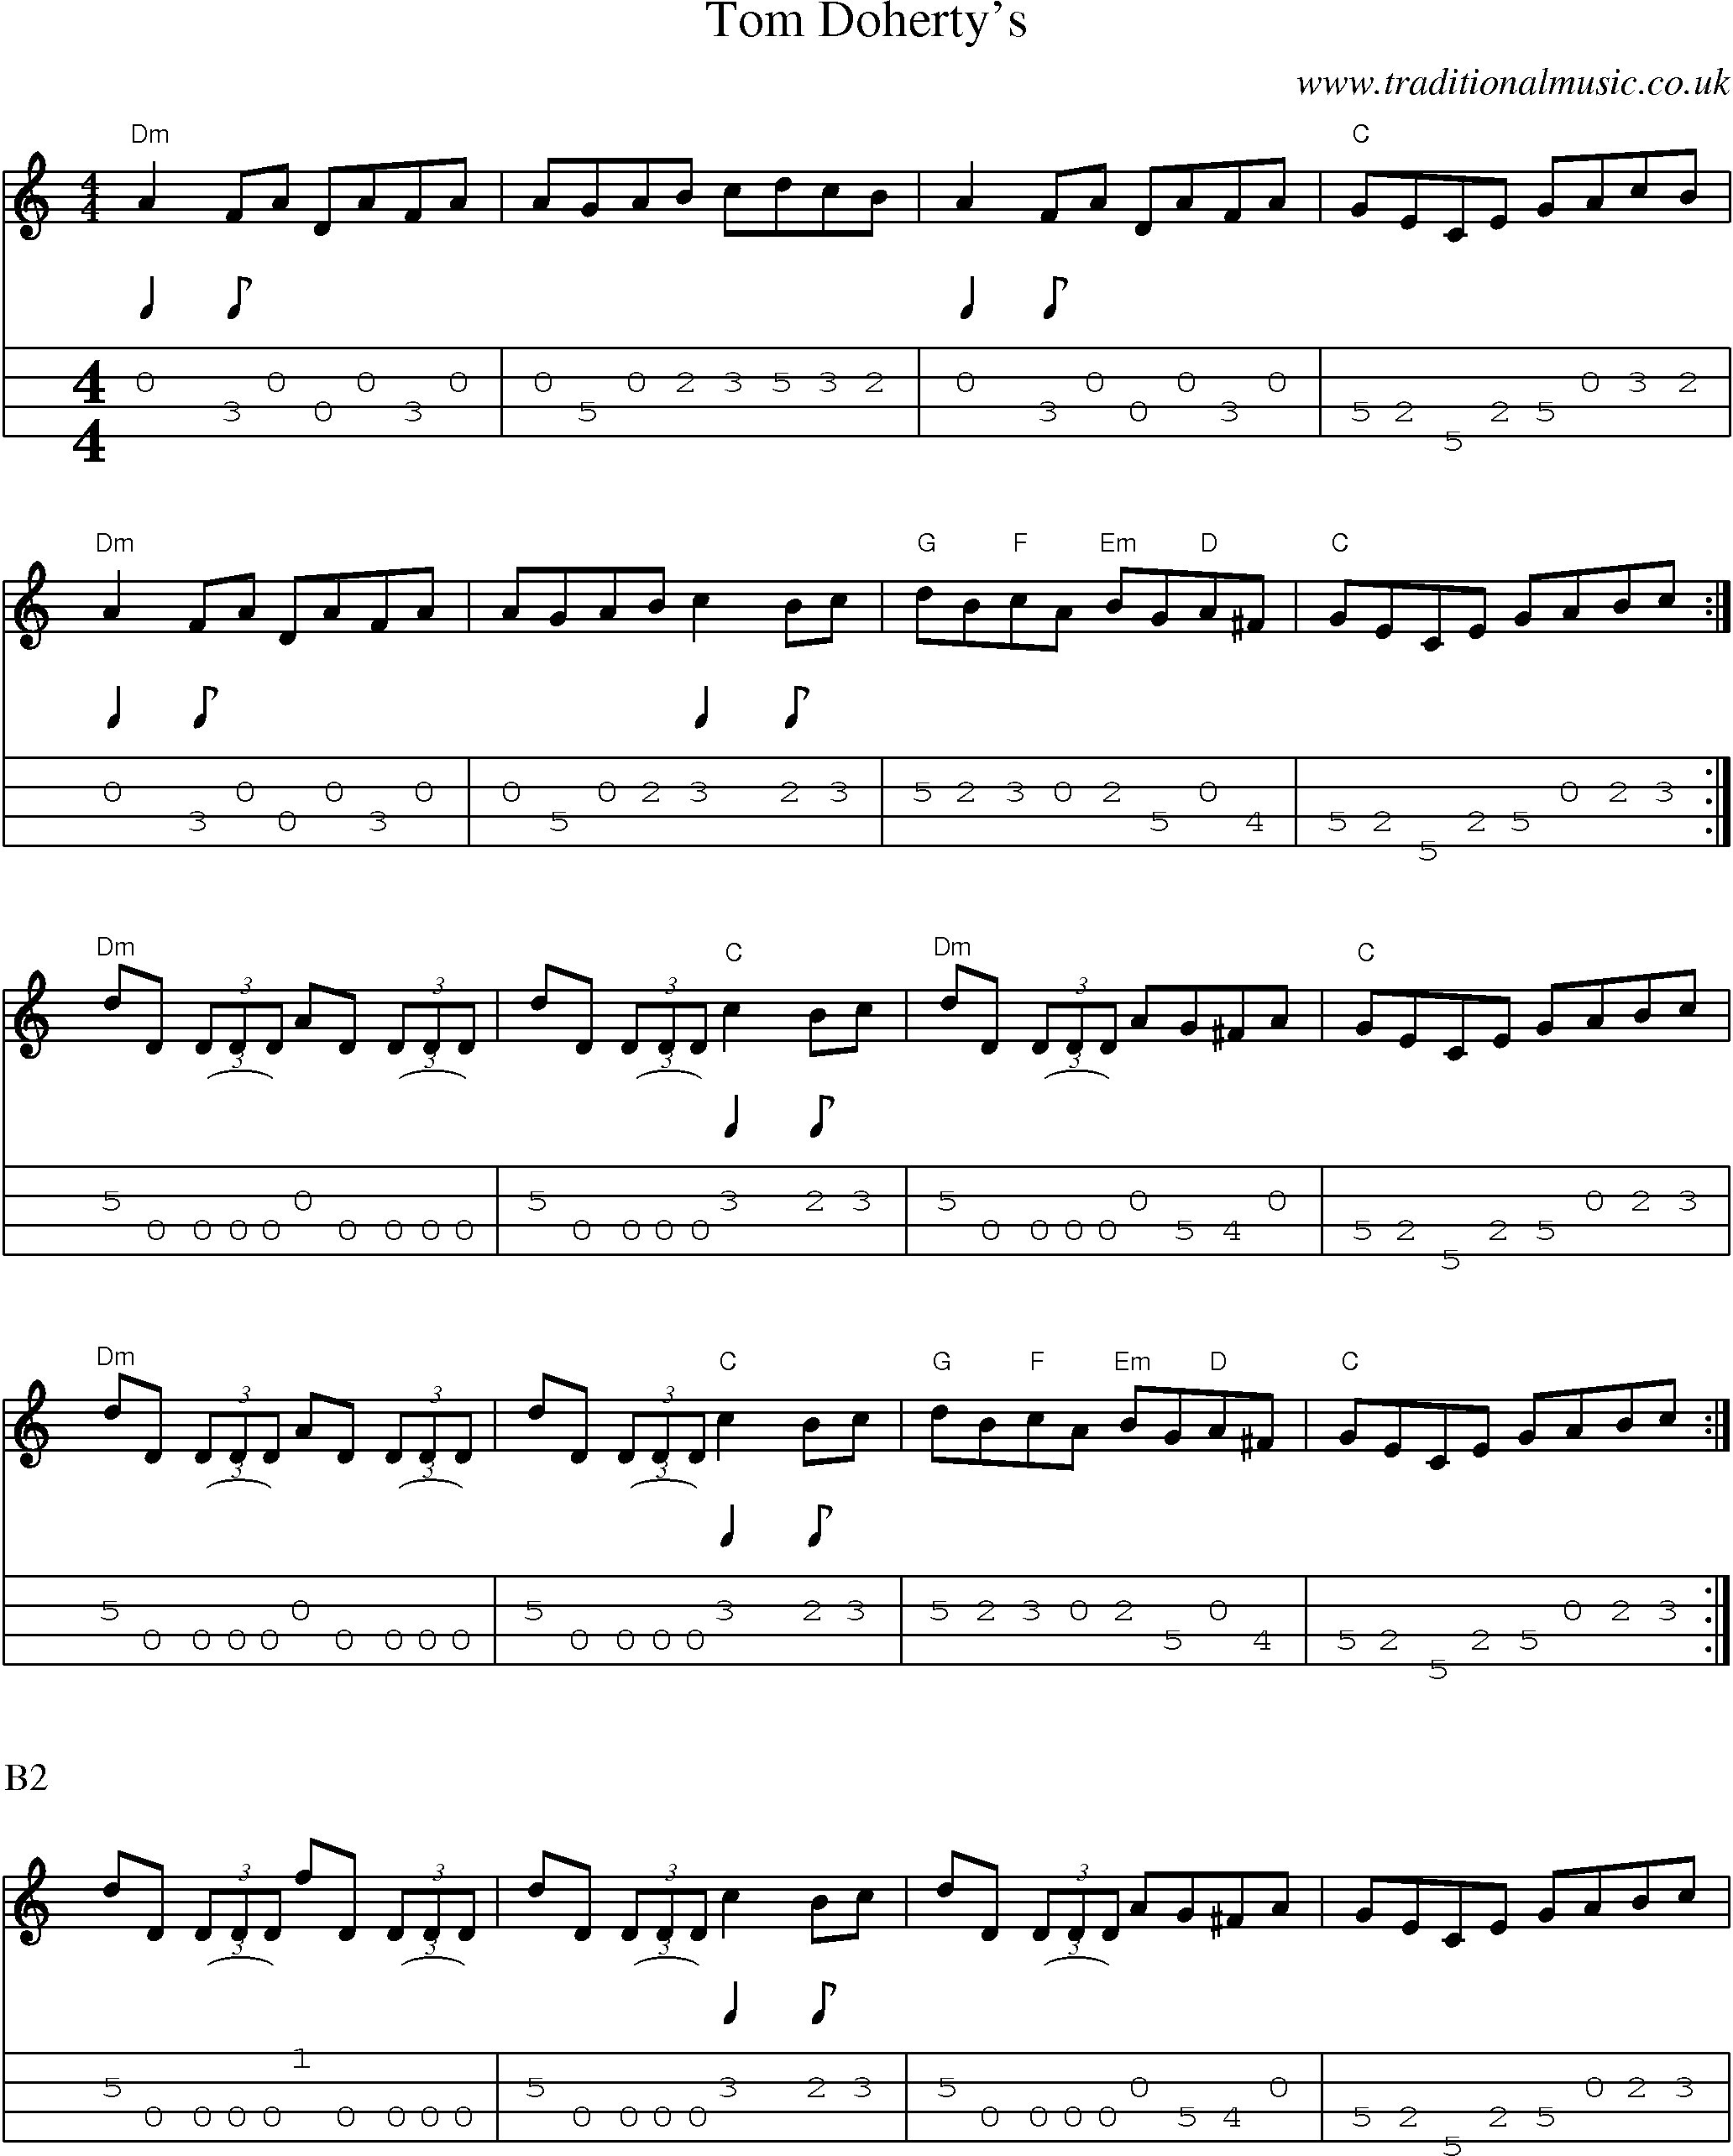 Music Score and Mandolin Tabs for Tom Dohertys